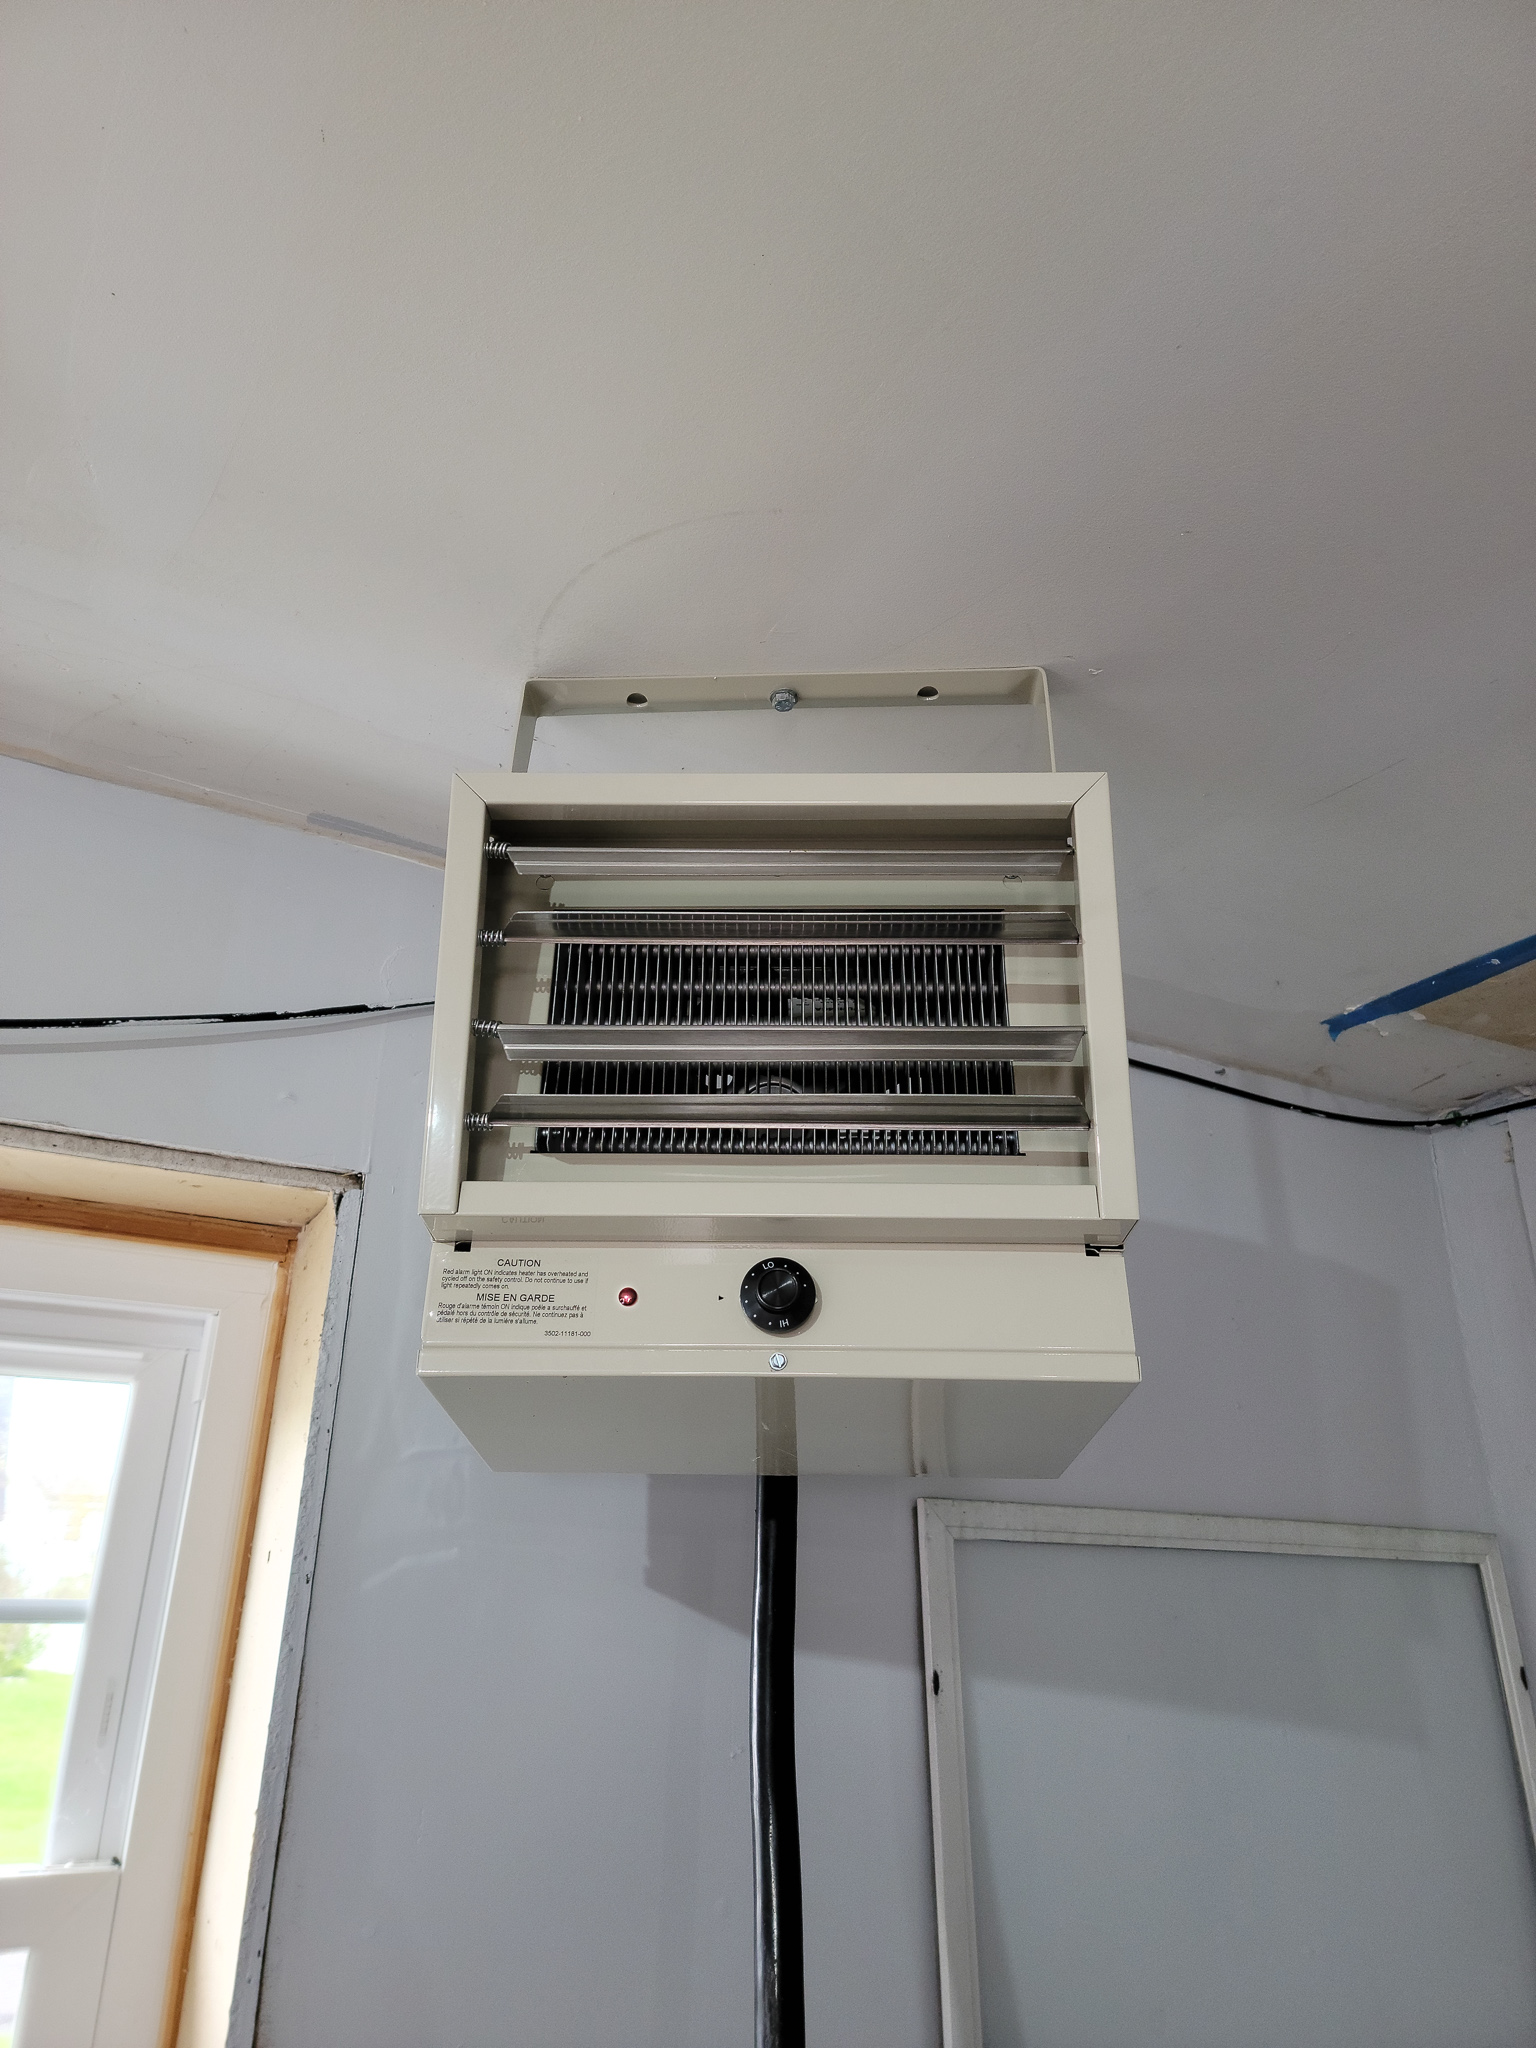 The Best Garage Heater Option mounted to a garage ceiling